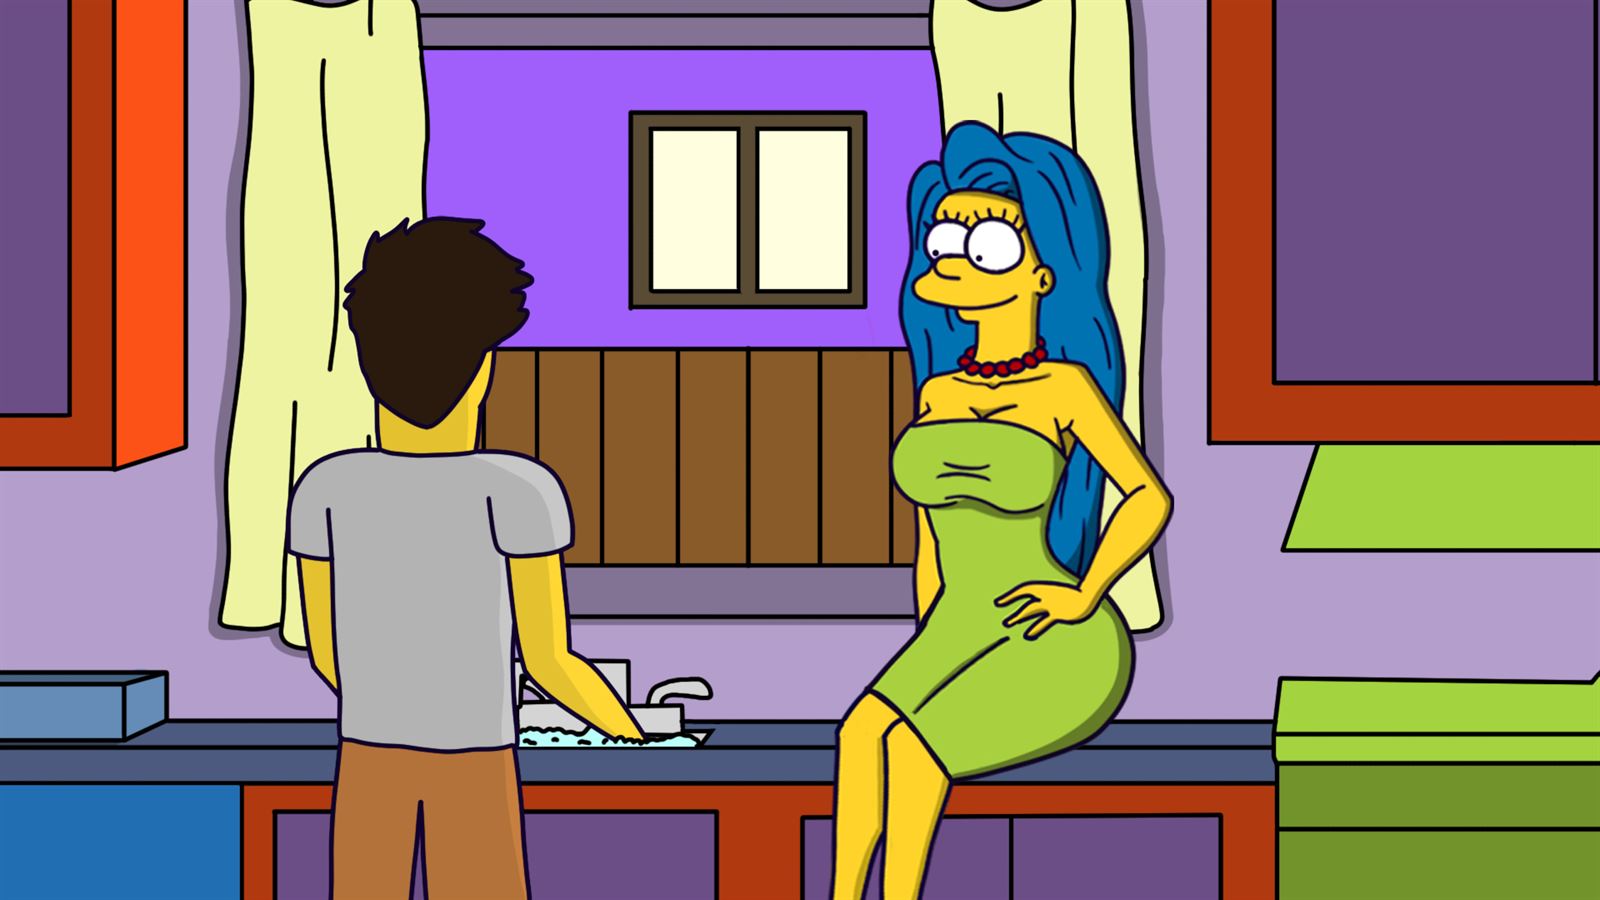 Ren'py] The Simpsons Simpvill - v1.03 by Squizzy 18+ Adult xxx Porn Game  Download